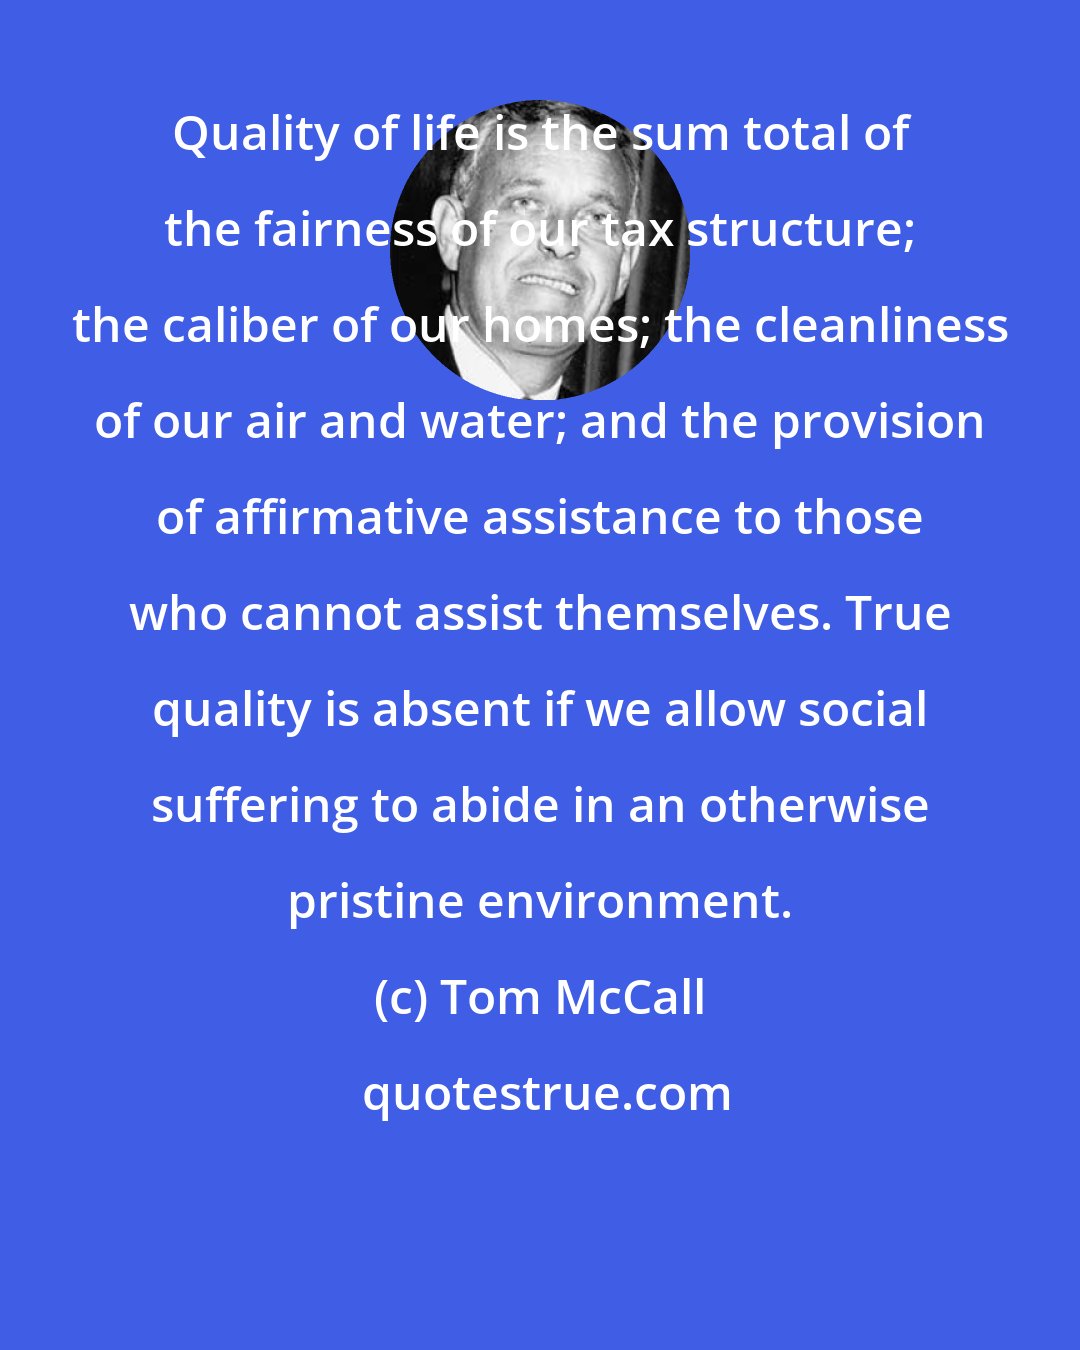 Tom McCall: Quality of life is the sum total of the fairness of our tax structure; the caliber of our homes; the cleanliness of our air and water; and the provision of affirmative assistance to those who cannot assist themselves. True quality is absent if we allow social suffering to abide in an otherwise pristine environment.